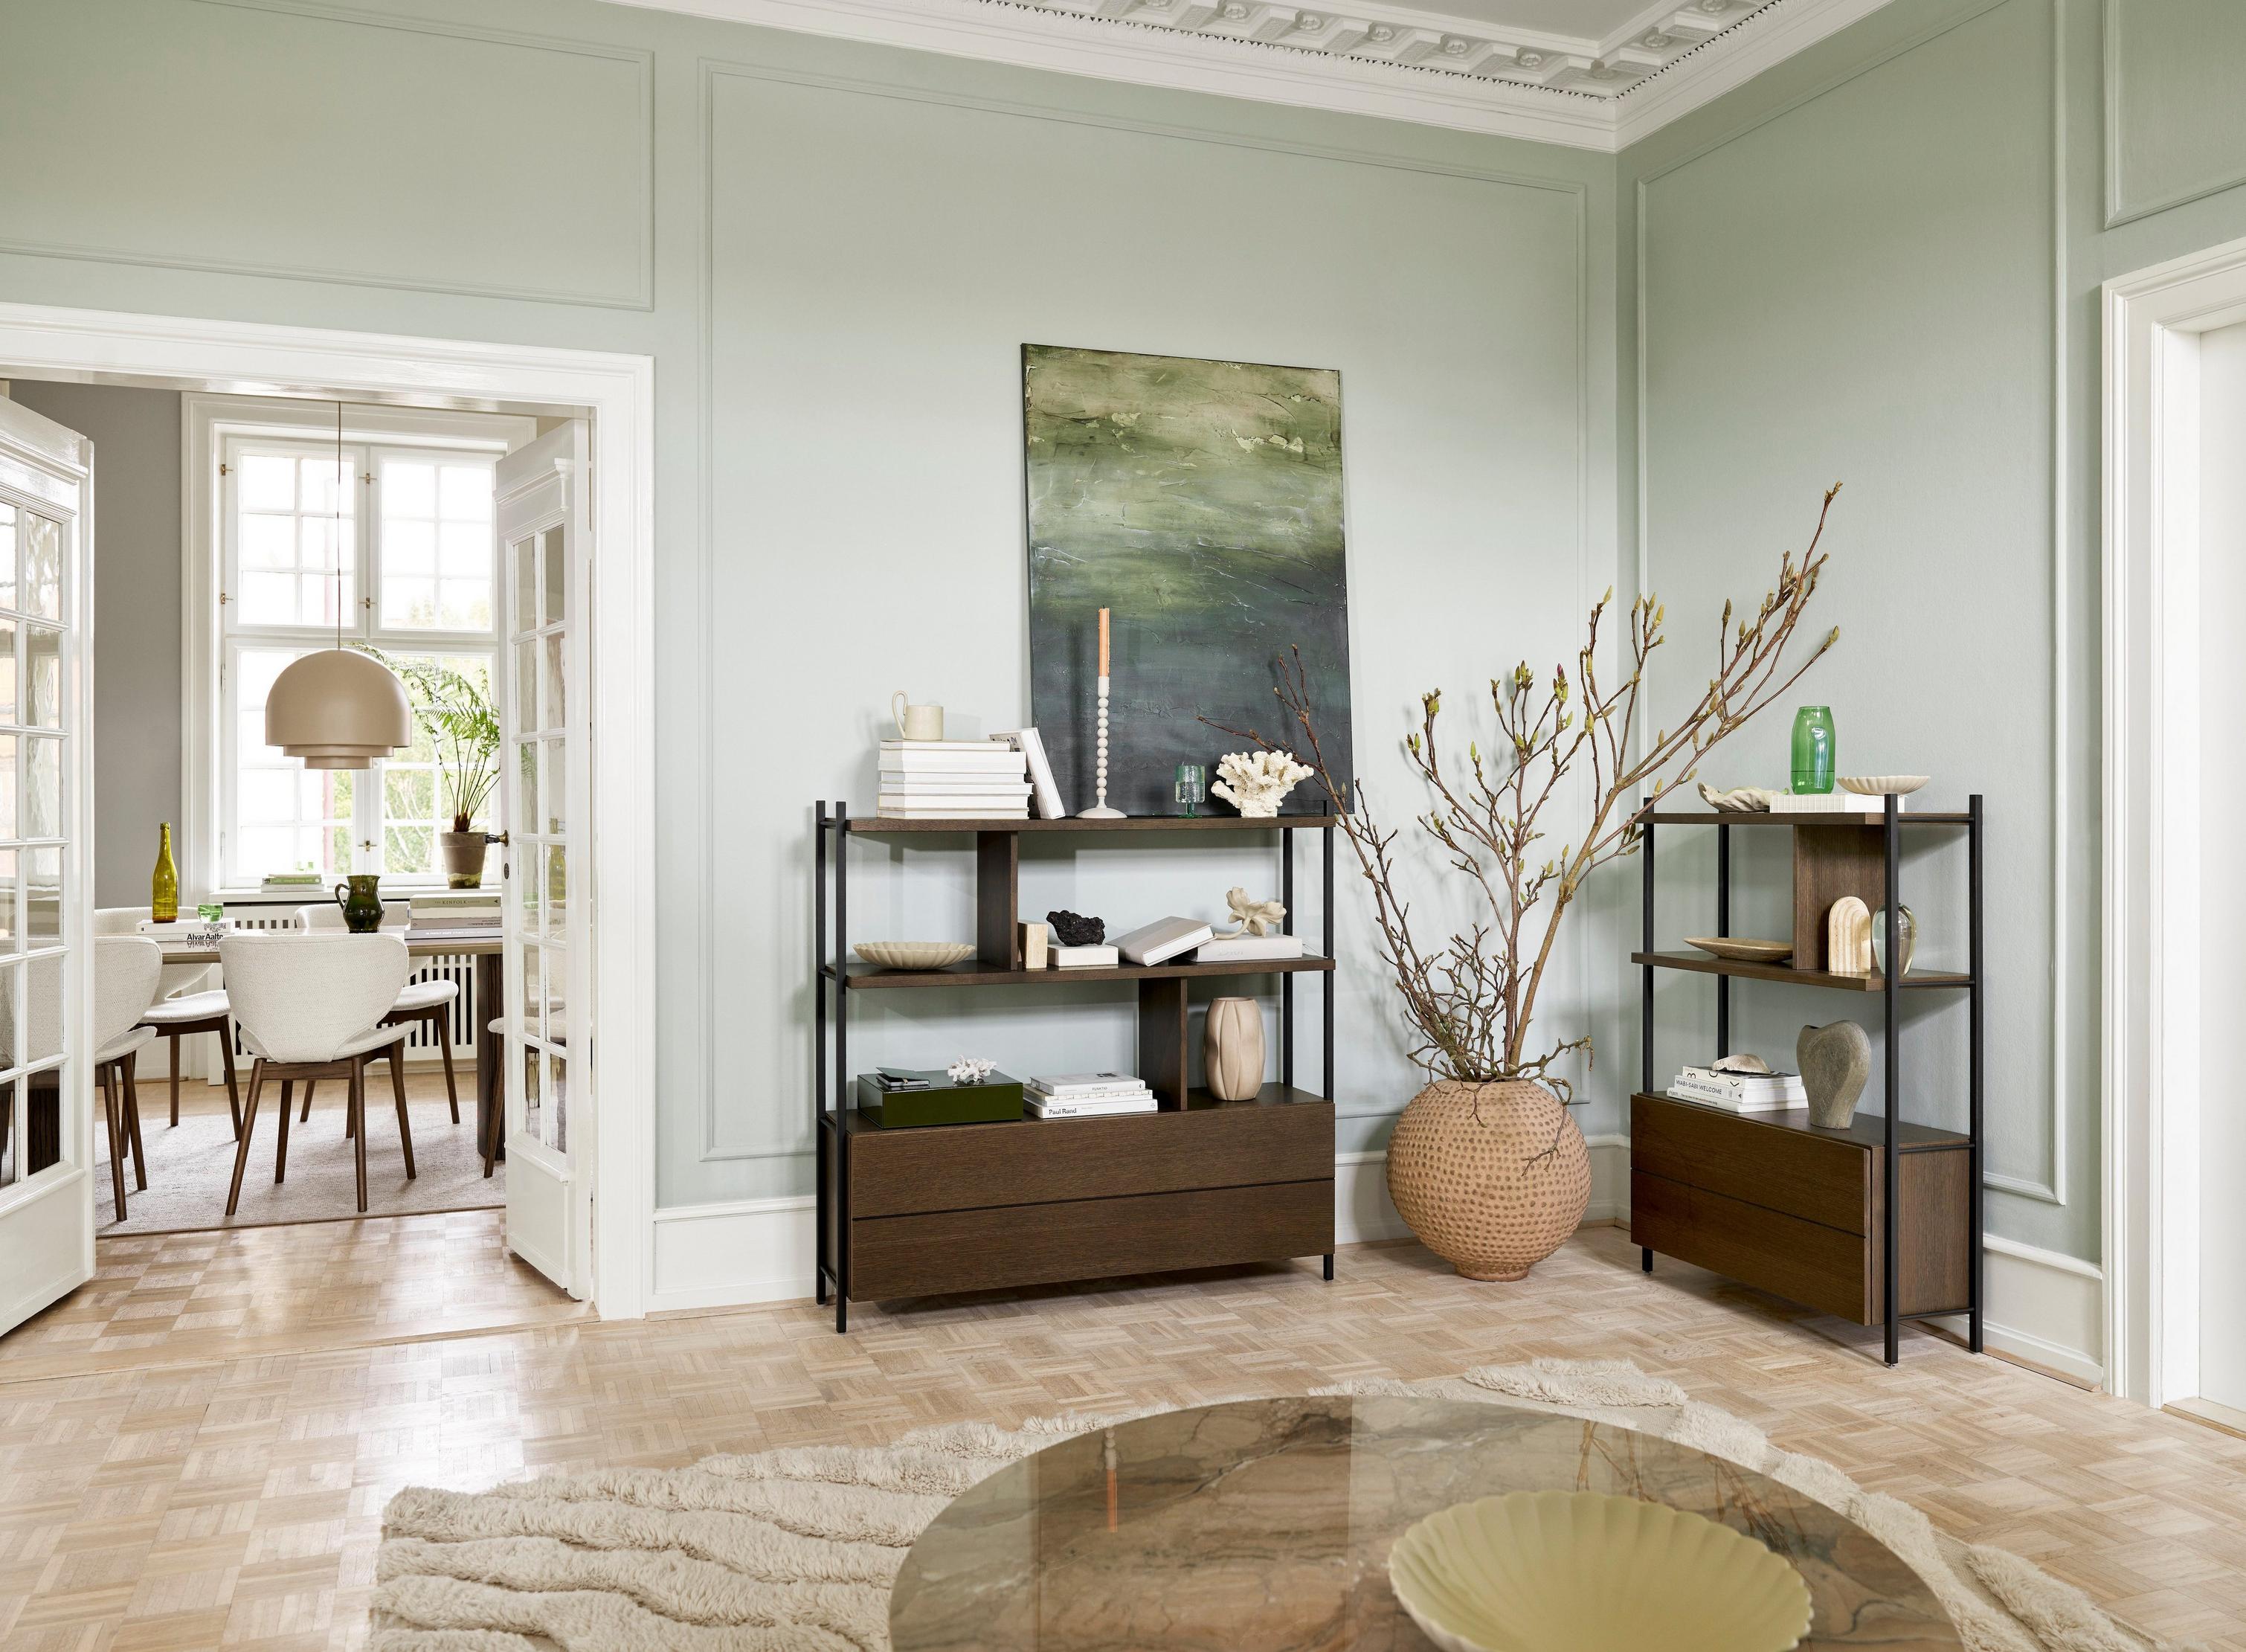 Classic room with pastel walls, shelving units, decorative items, and a view into an adjoining space.